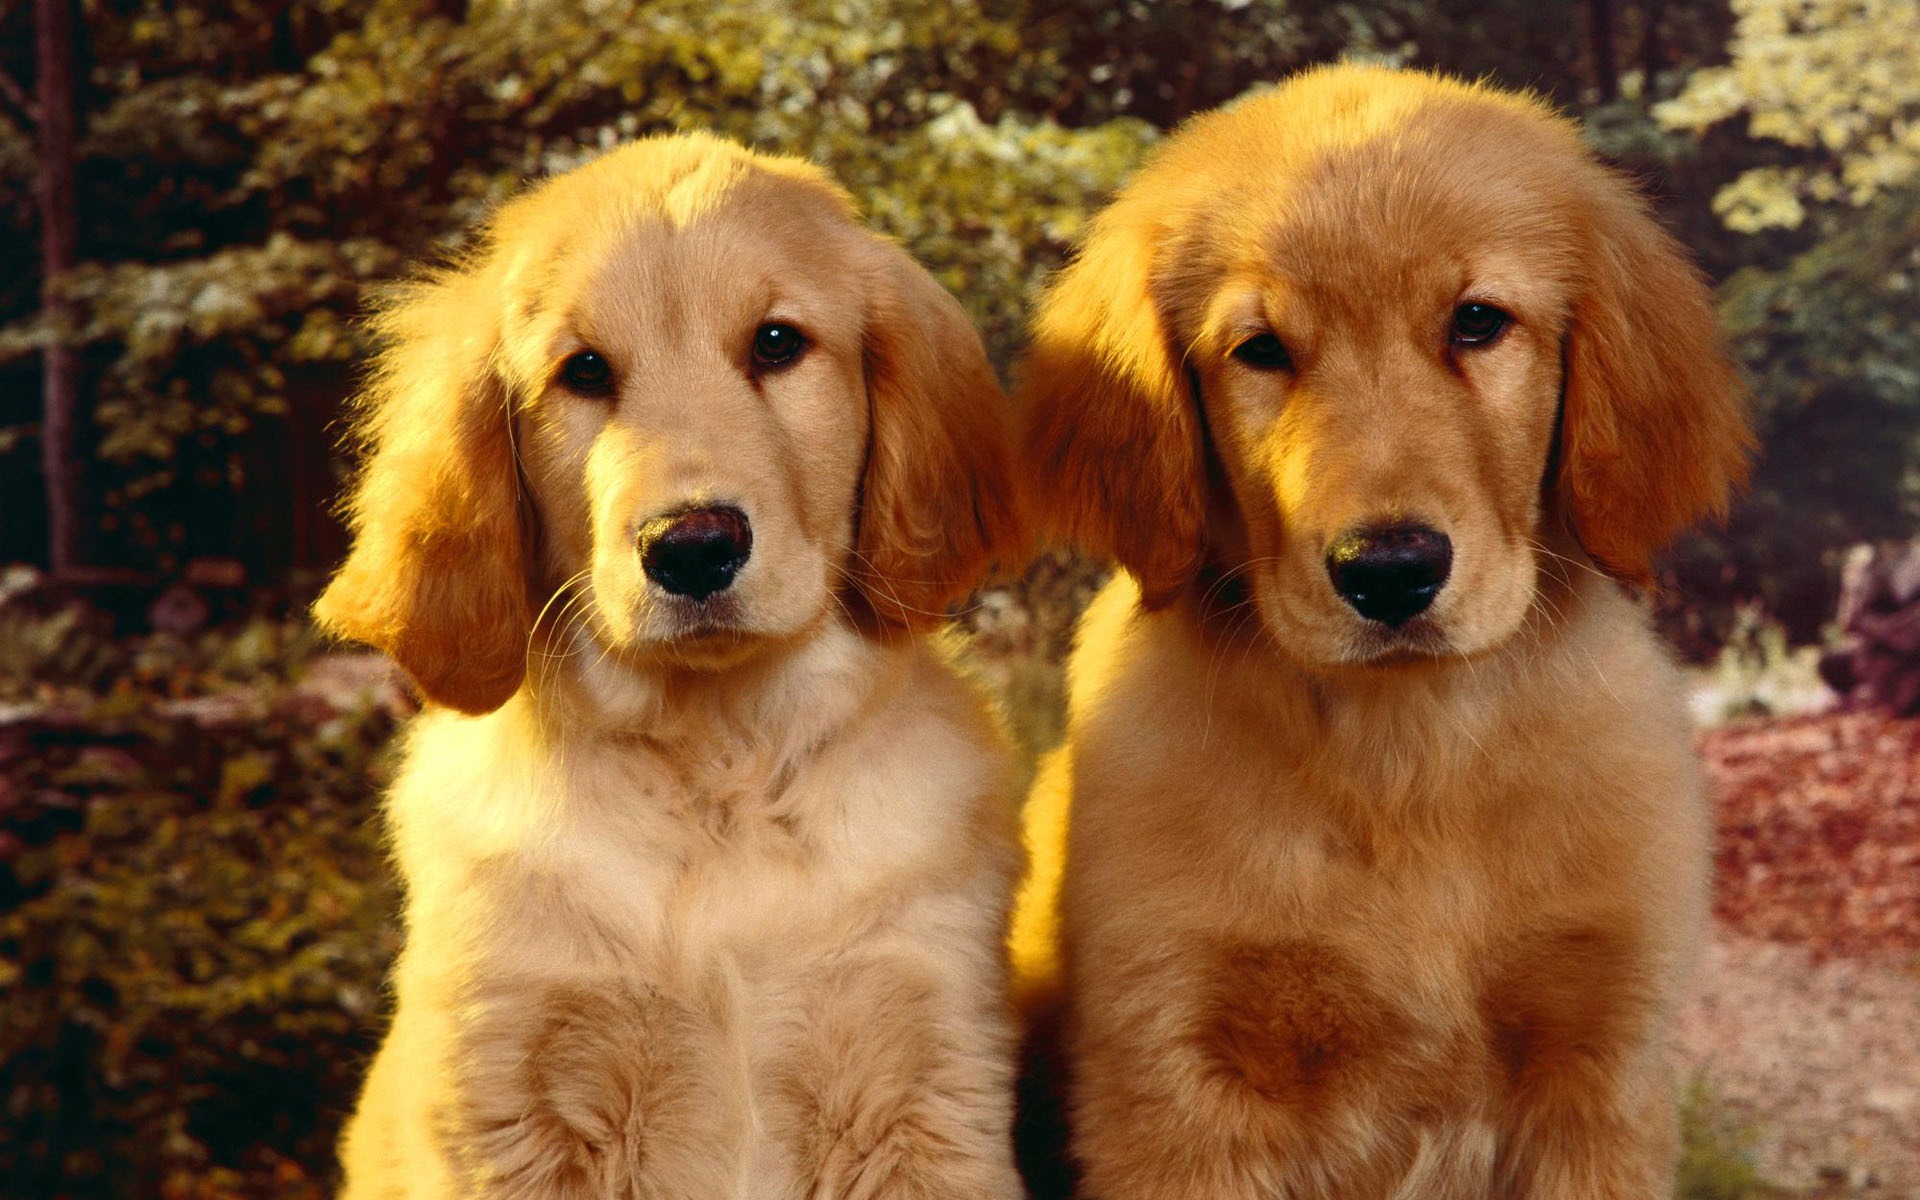 Puppy Photo HD wallpapers (2) #1 - 1920x1200